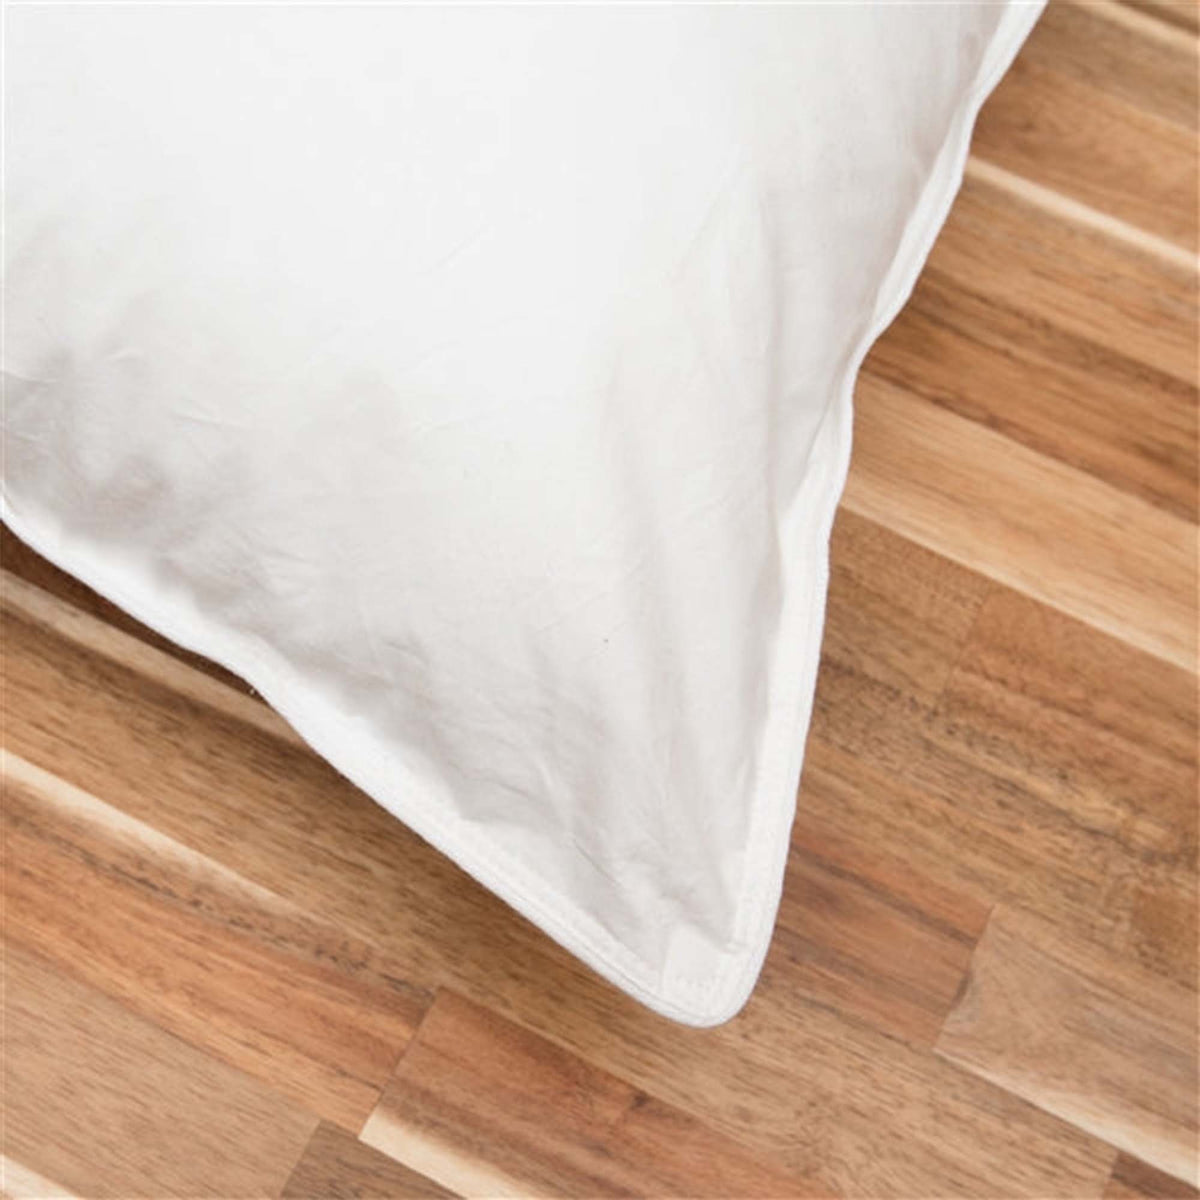 Anti-Microbial Bed Pillows - Bed Pillows - American Blanket Company